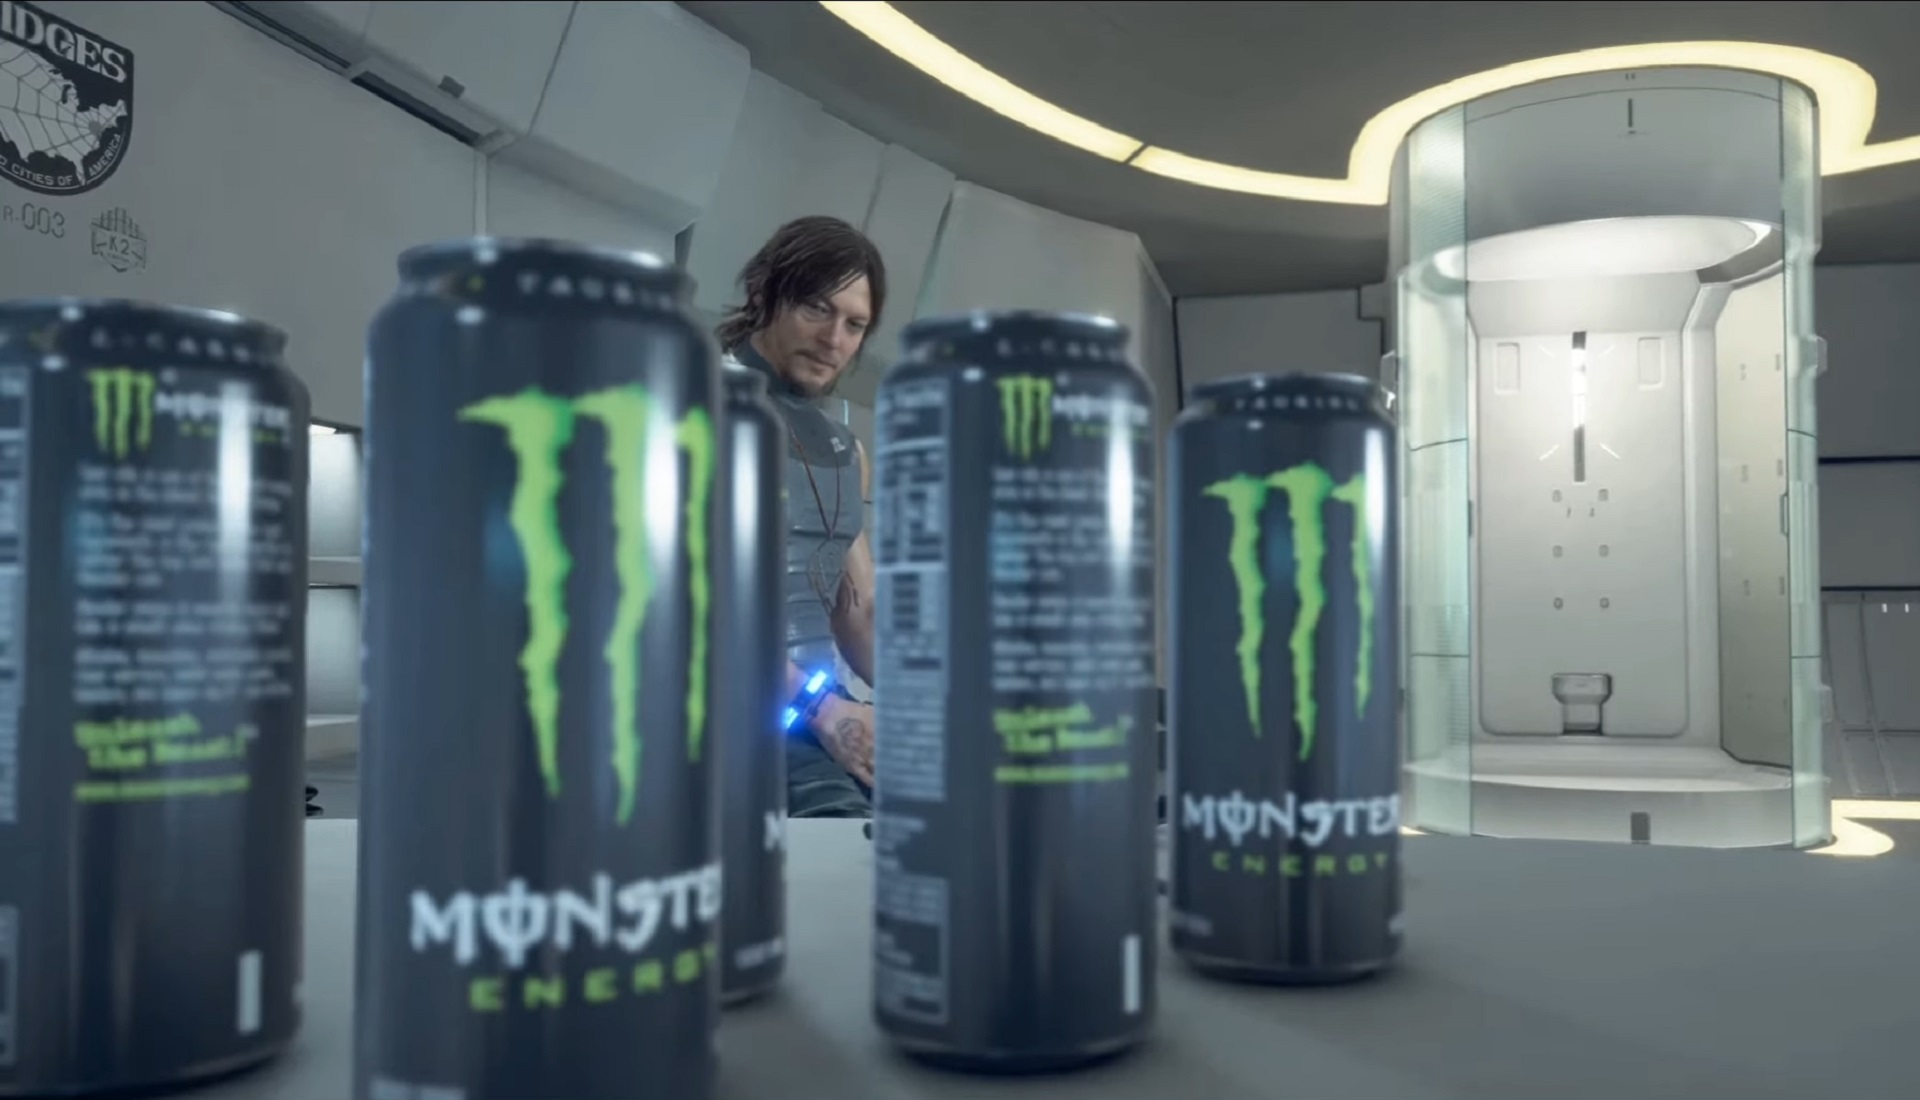 Monster Energy sues indie game for having the word 'Monster' in it